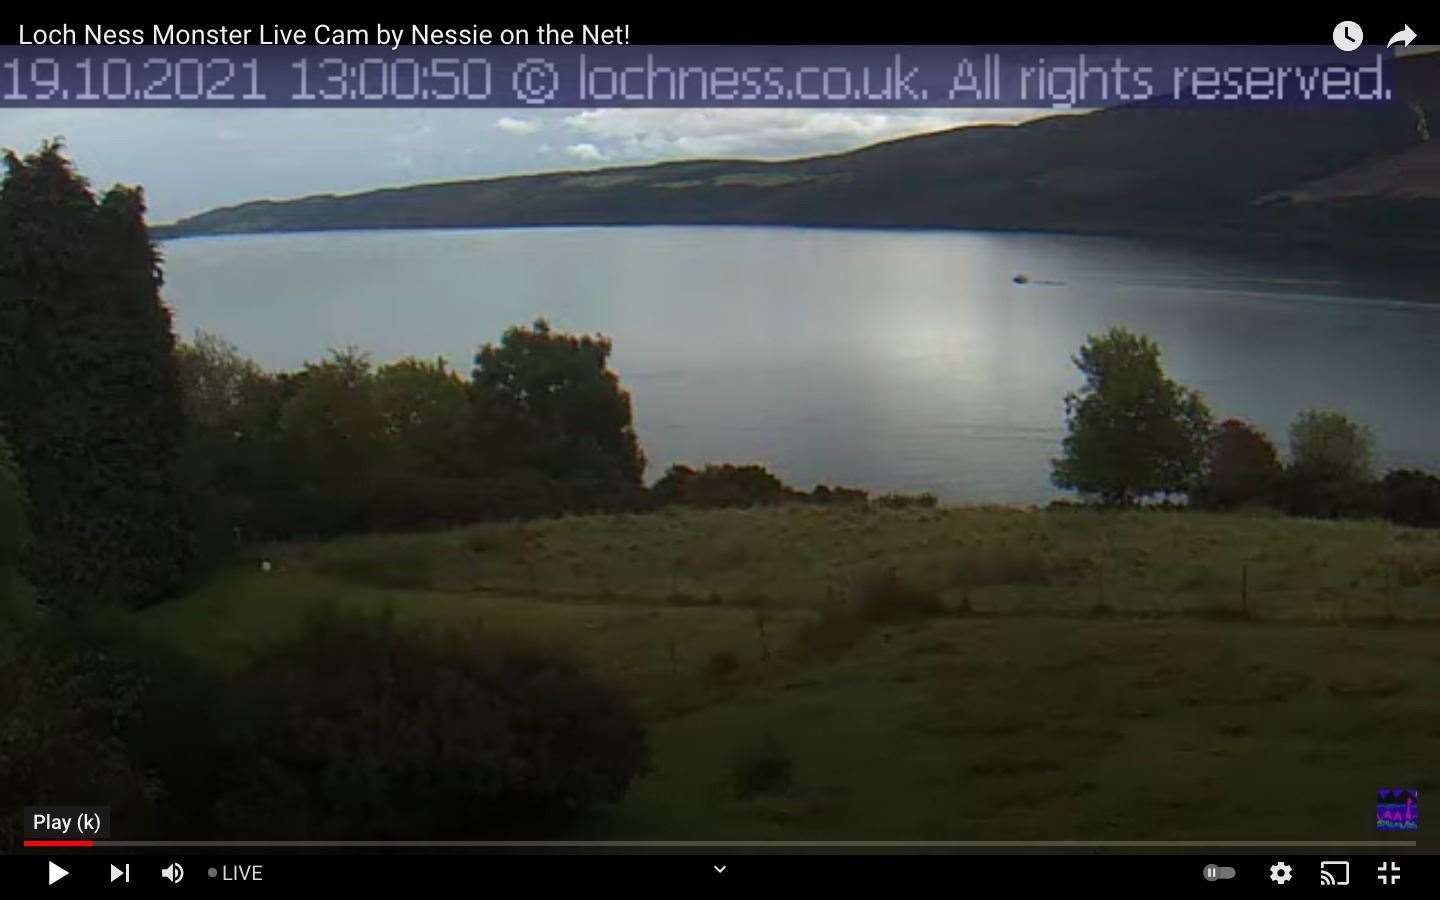 Eoin O'Faodhagain has reported his fifth sighting this year from the Loch Ness Webcam.